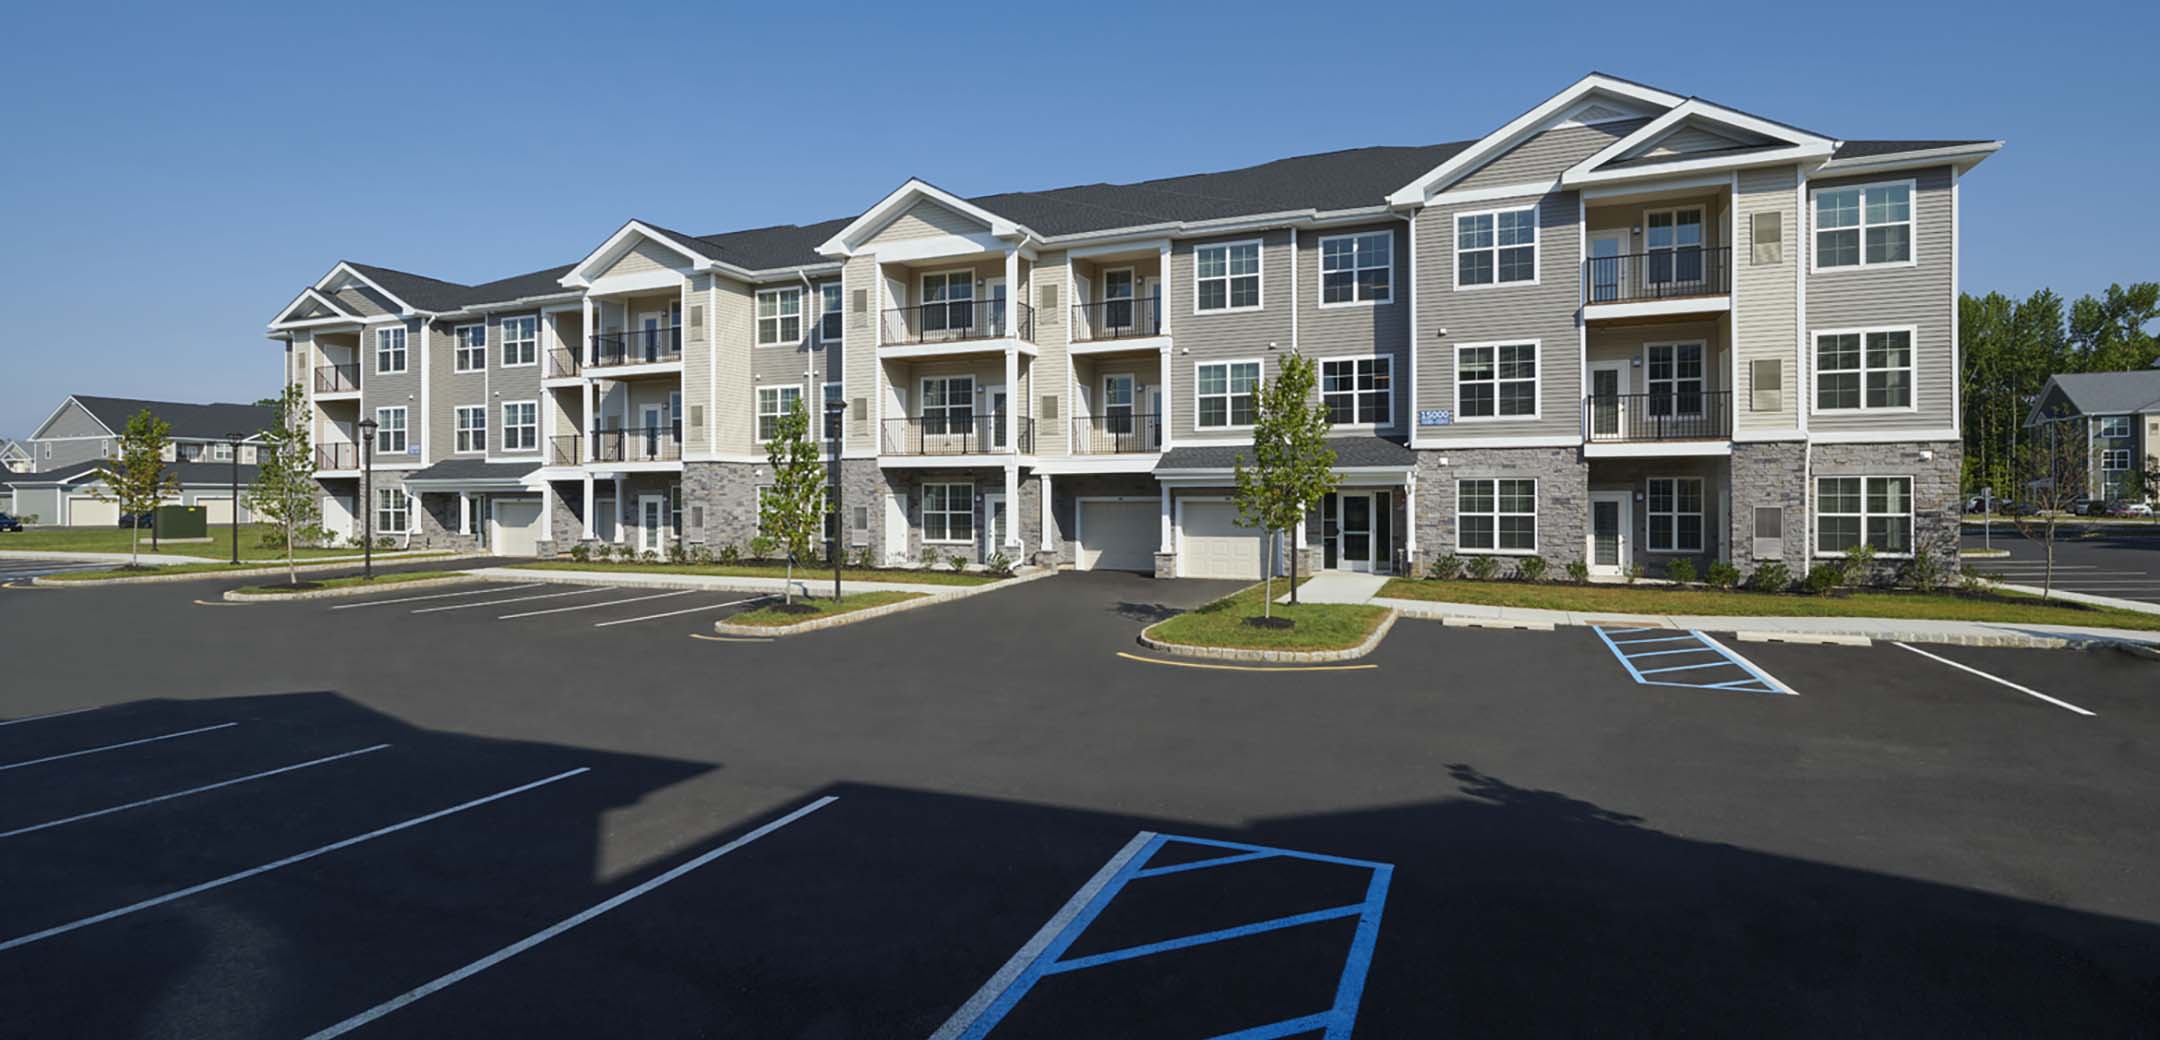 An exterior view of one of the Signature Place MtLaurel apartment buildings showcasing the front garage, front door and parking lot.